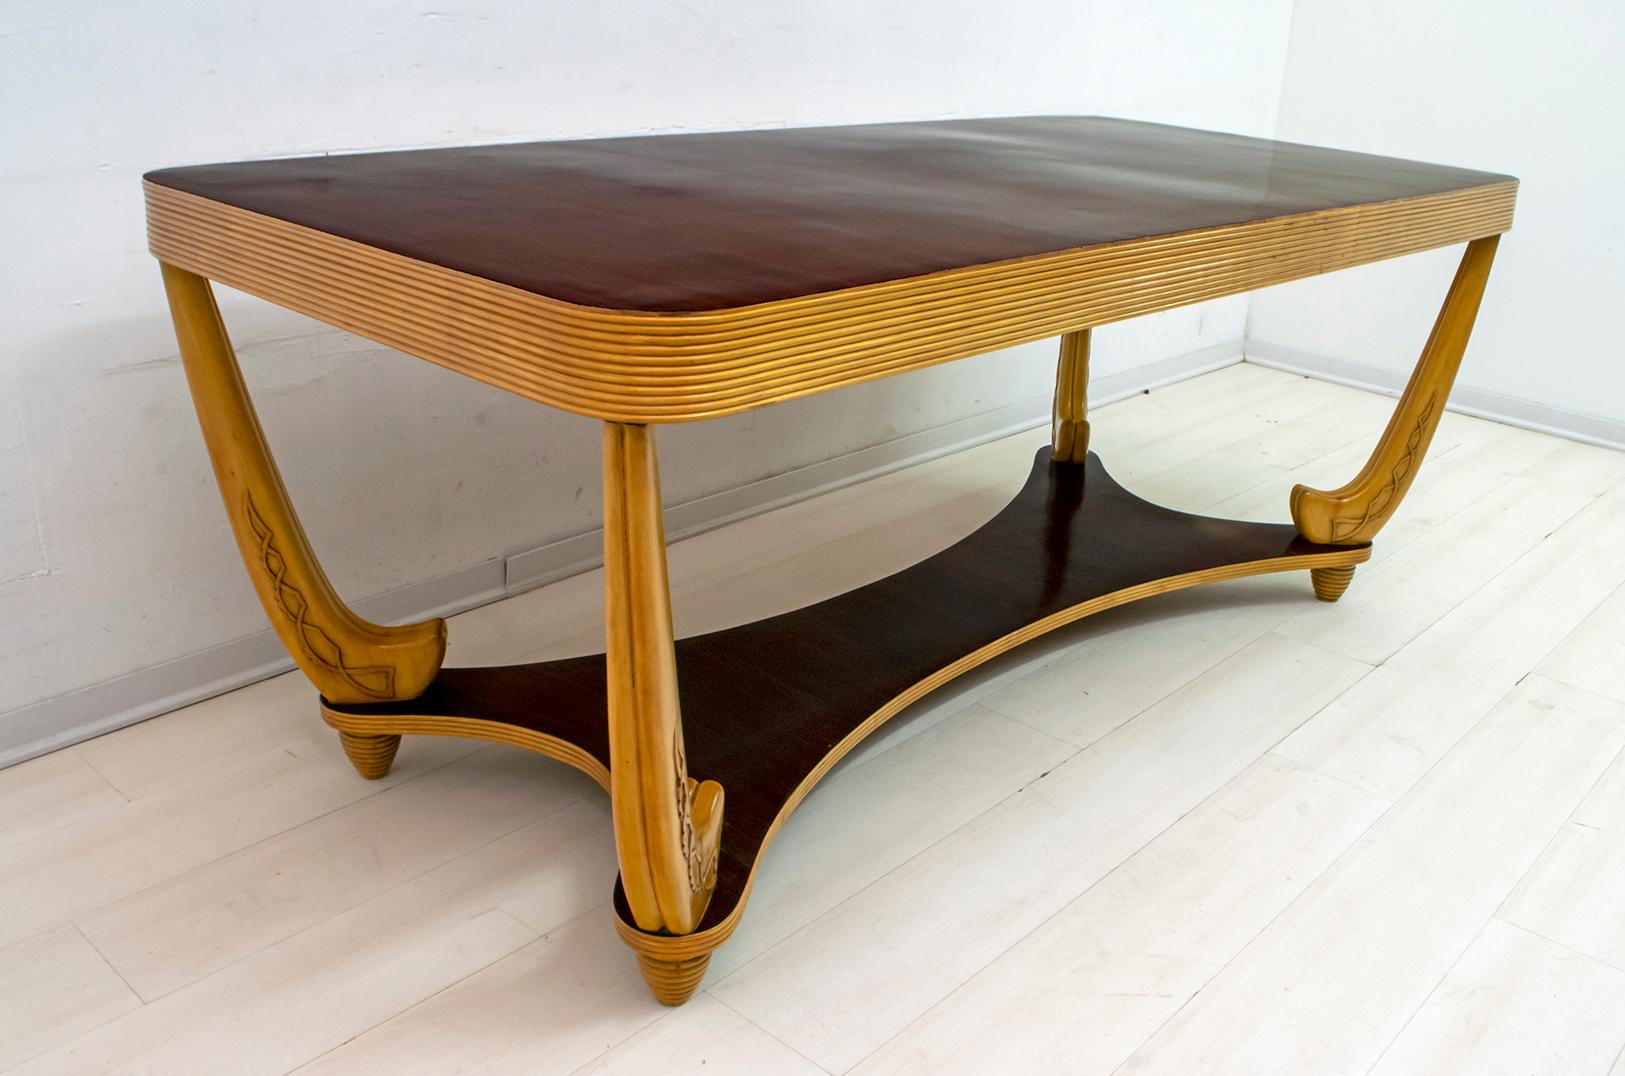 Table attributed to Pier Luigi Colli, in walnut and maple wood, production from the 1940s.